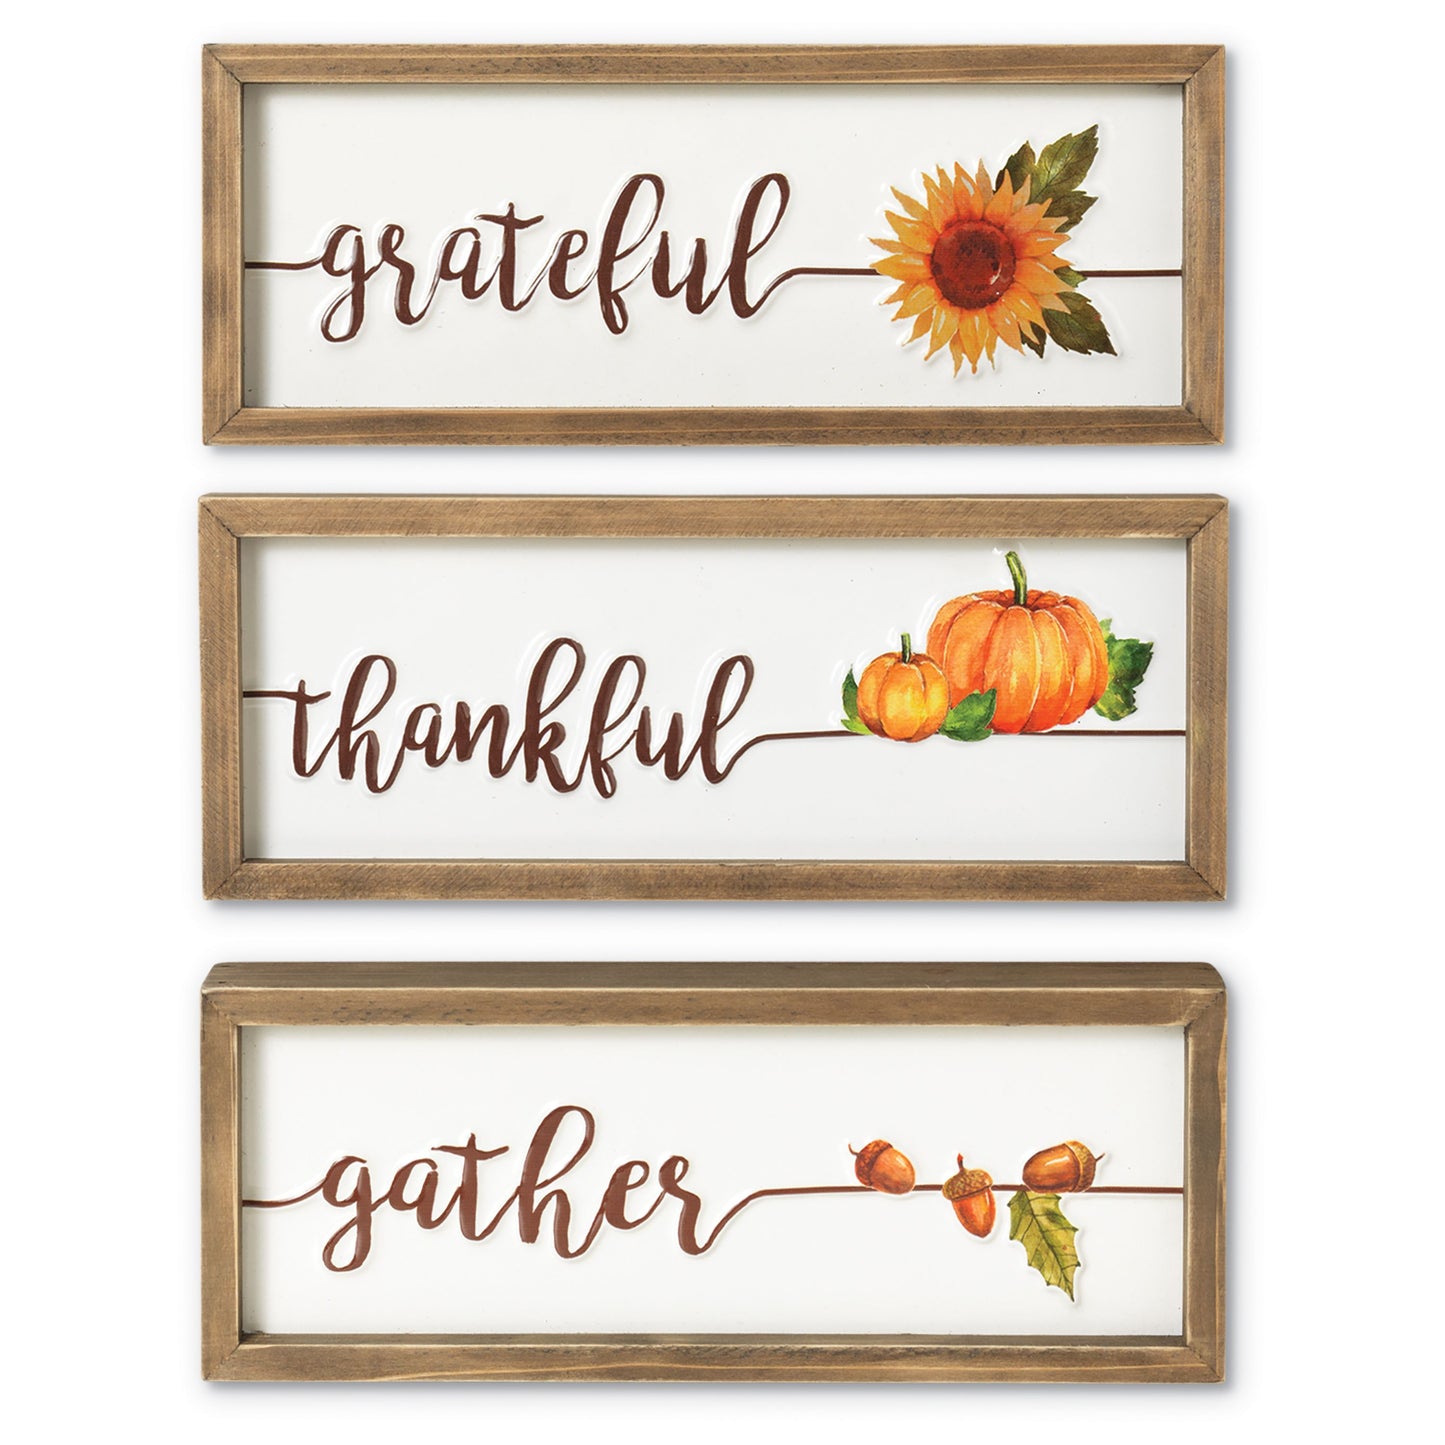 Gerson Company 11.5"L Metal & Wood Harvest Embossed Wall Sign, 3 Asst